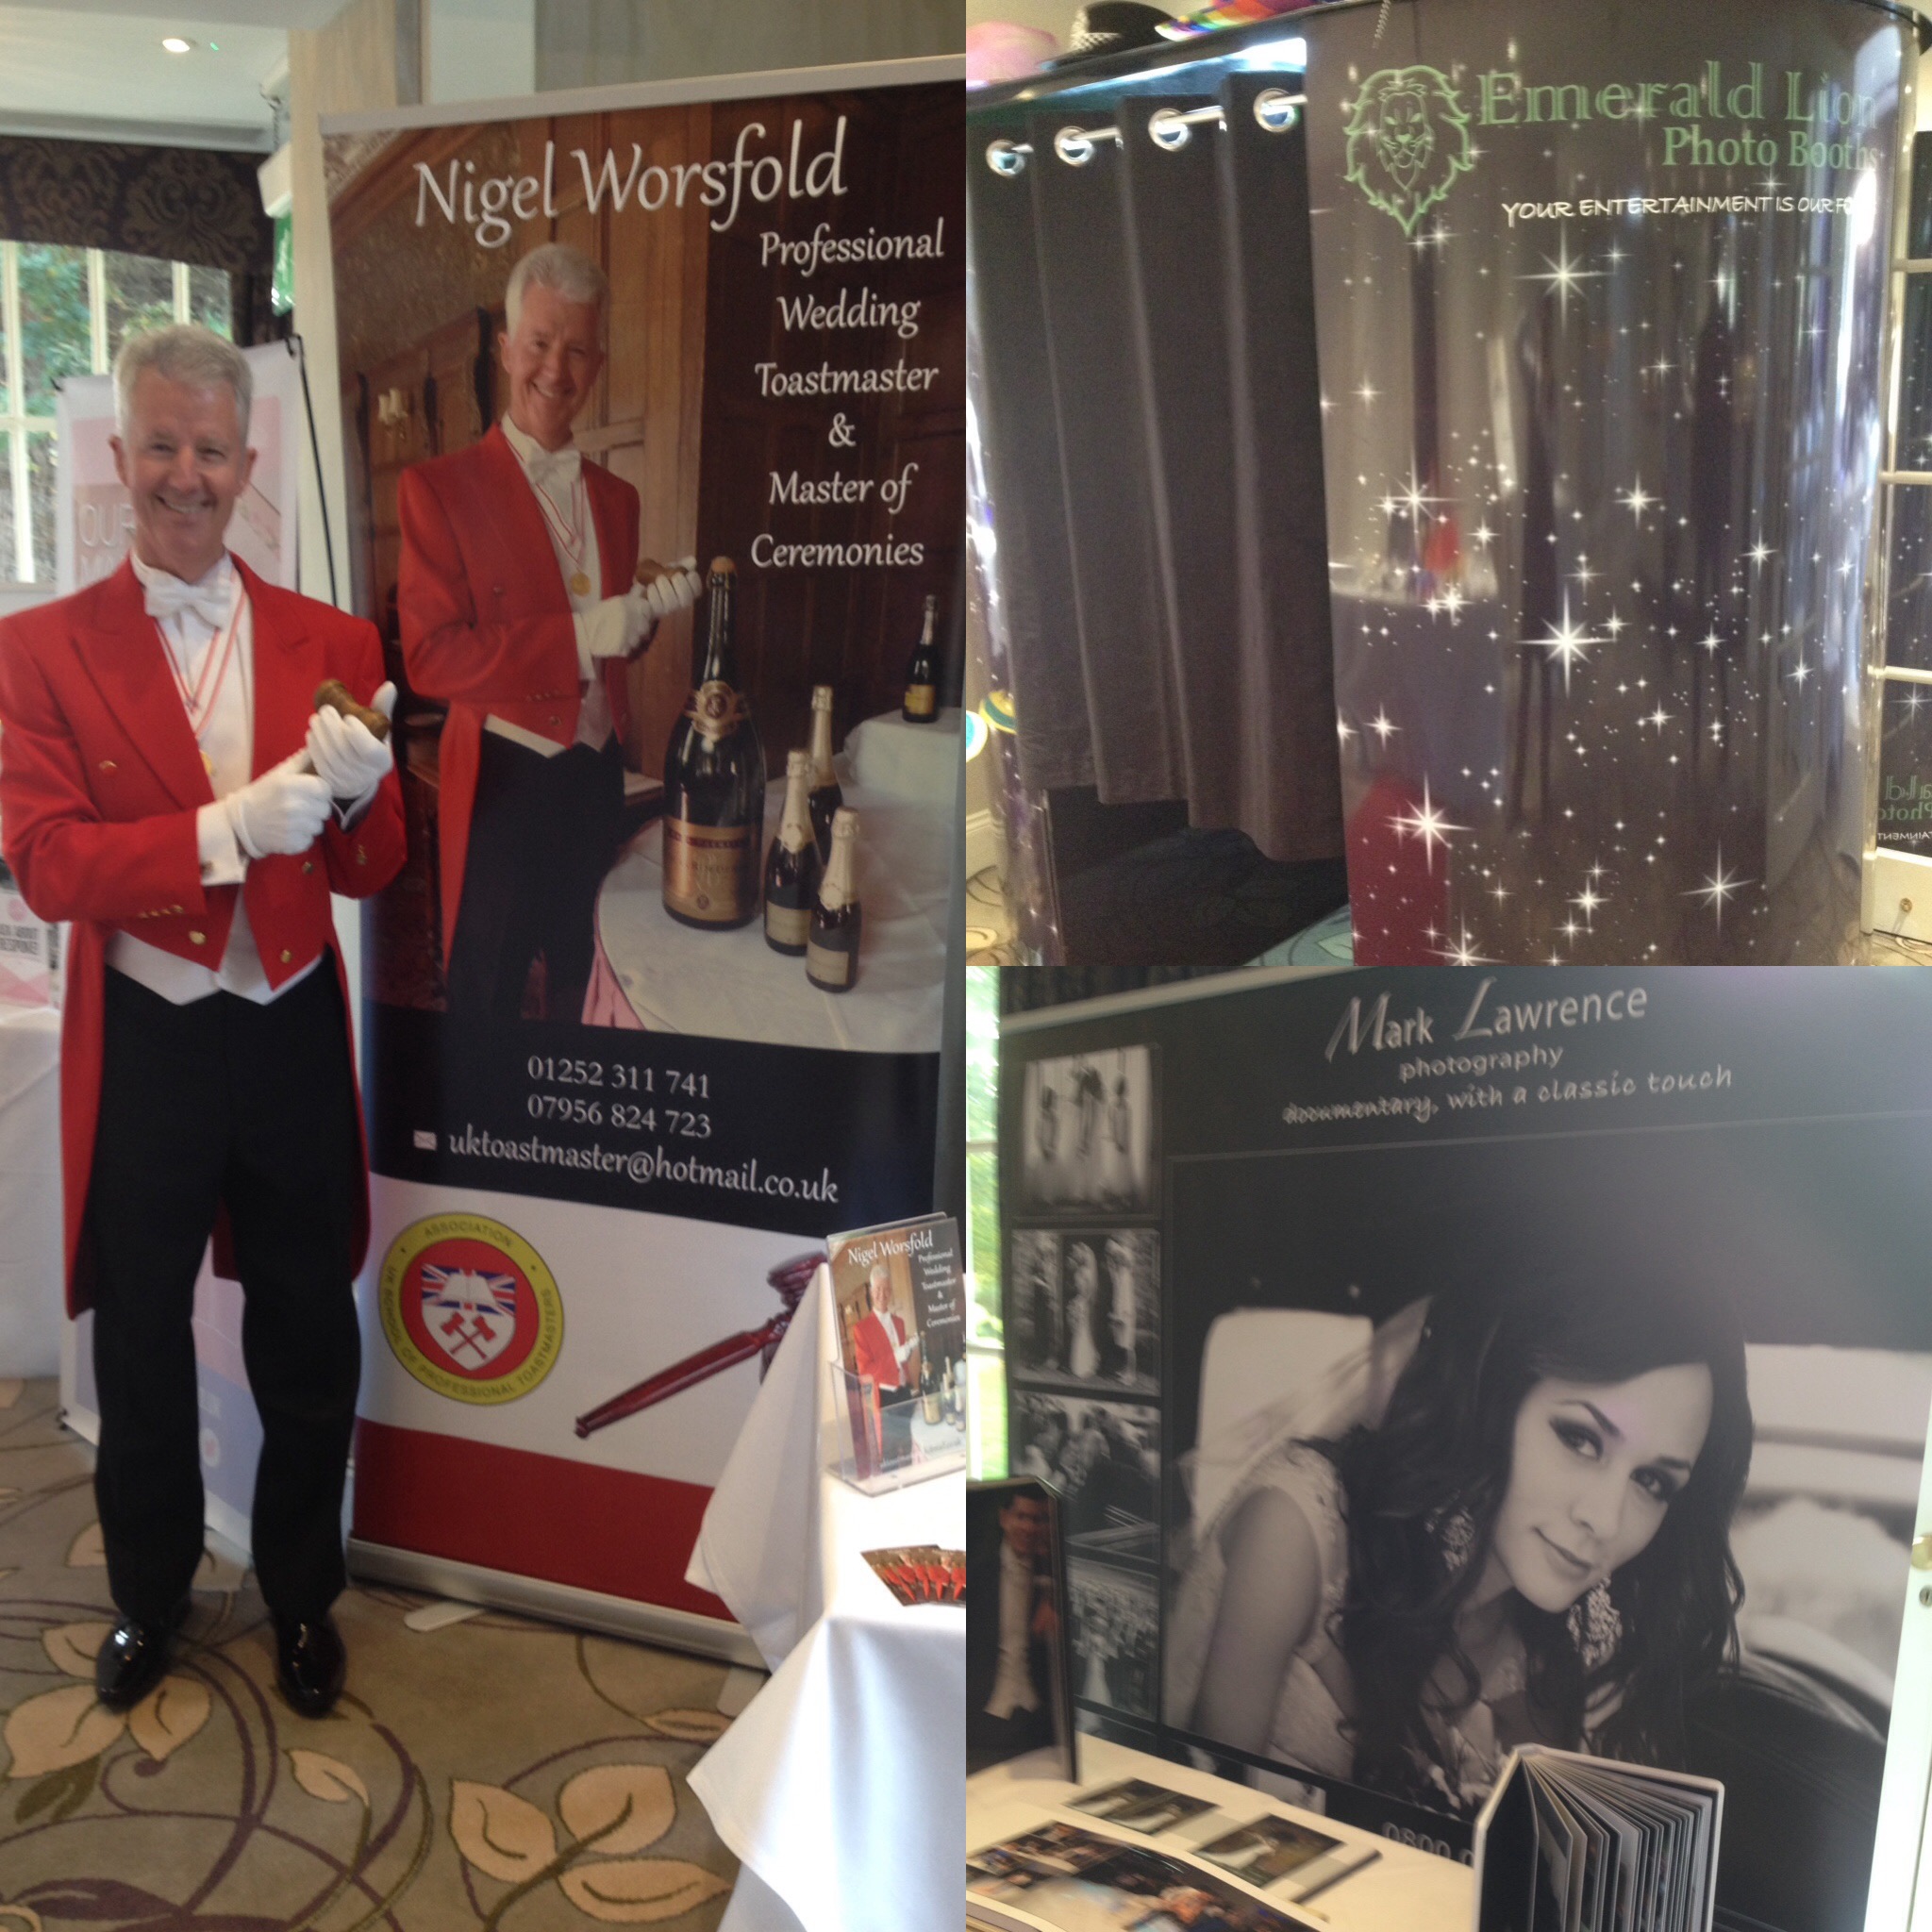 , Emerald Lion photo booths, Mark Lawrence Photography, Nigel Worsfold Professional Toastmaster 